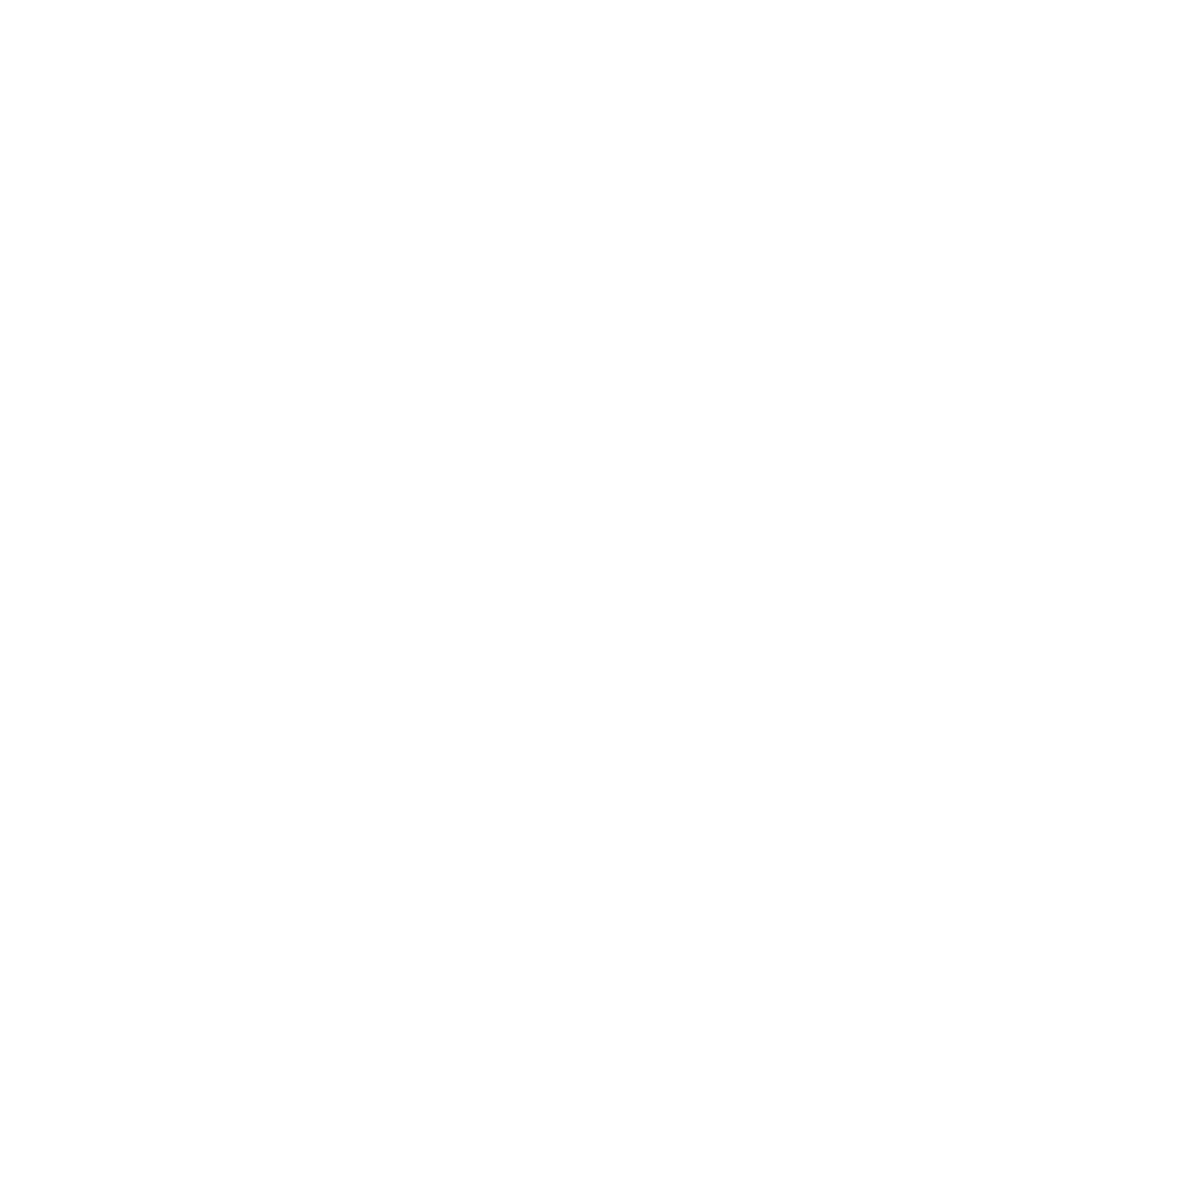 Talent Growth Management for Bussines and People